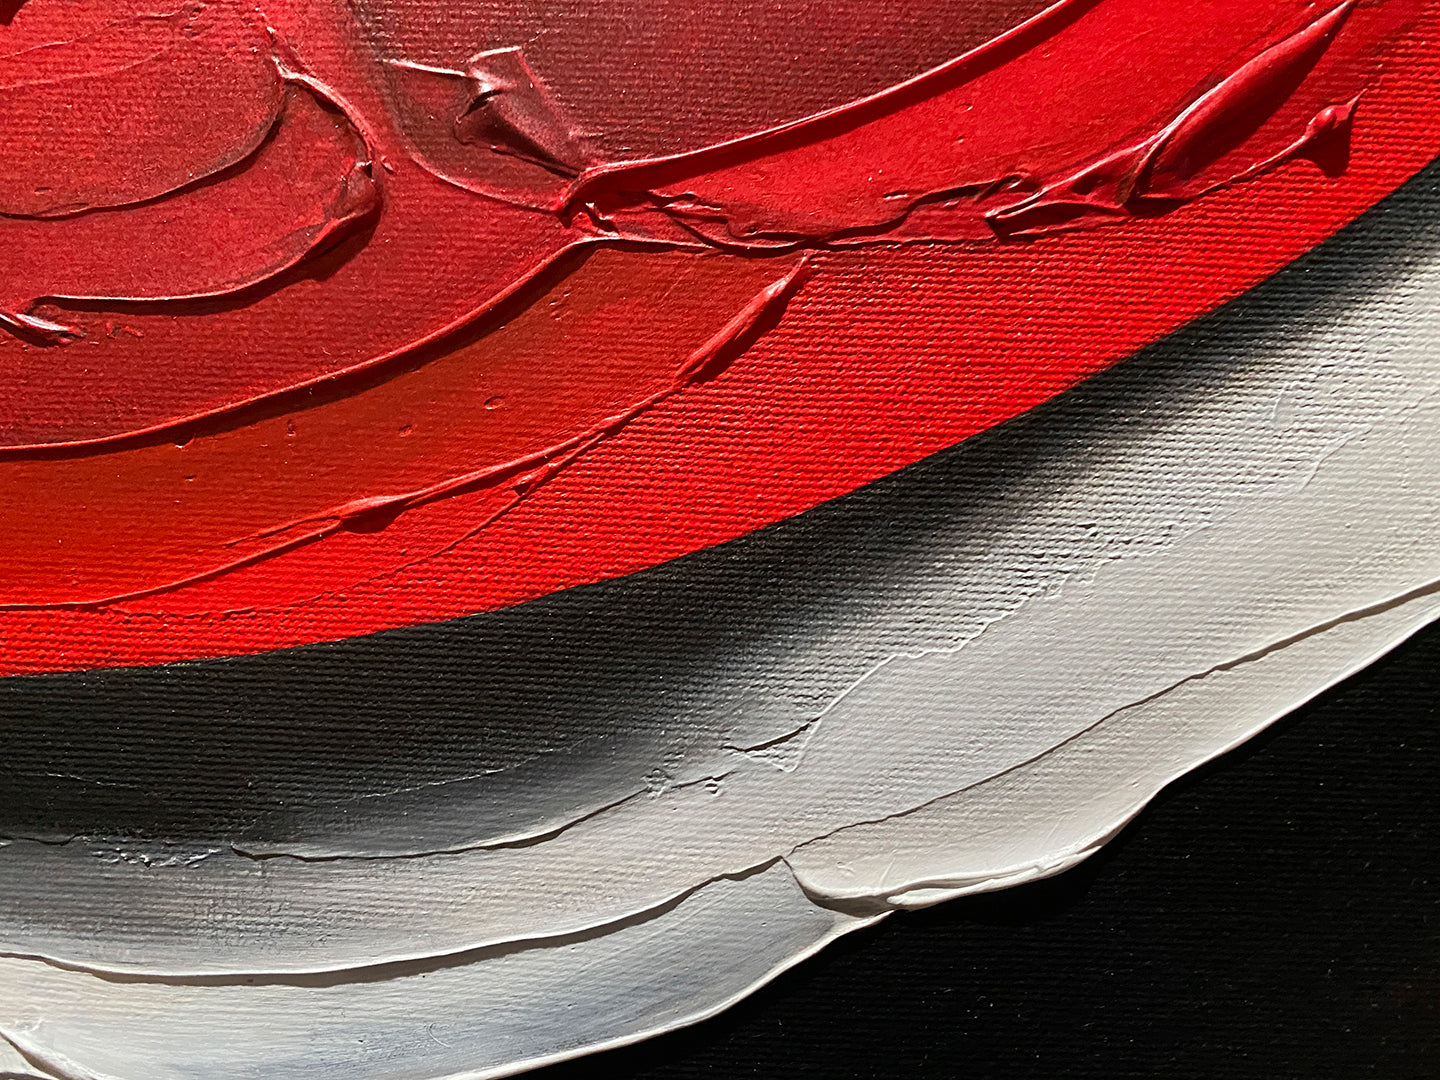 Abstract, acrylic and mixed-media painting close-up 2. texture paste, red, black, grey, and white acrylic paint on round canvas with curved-edges